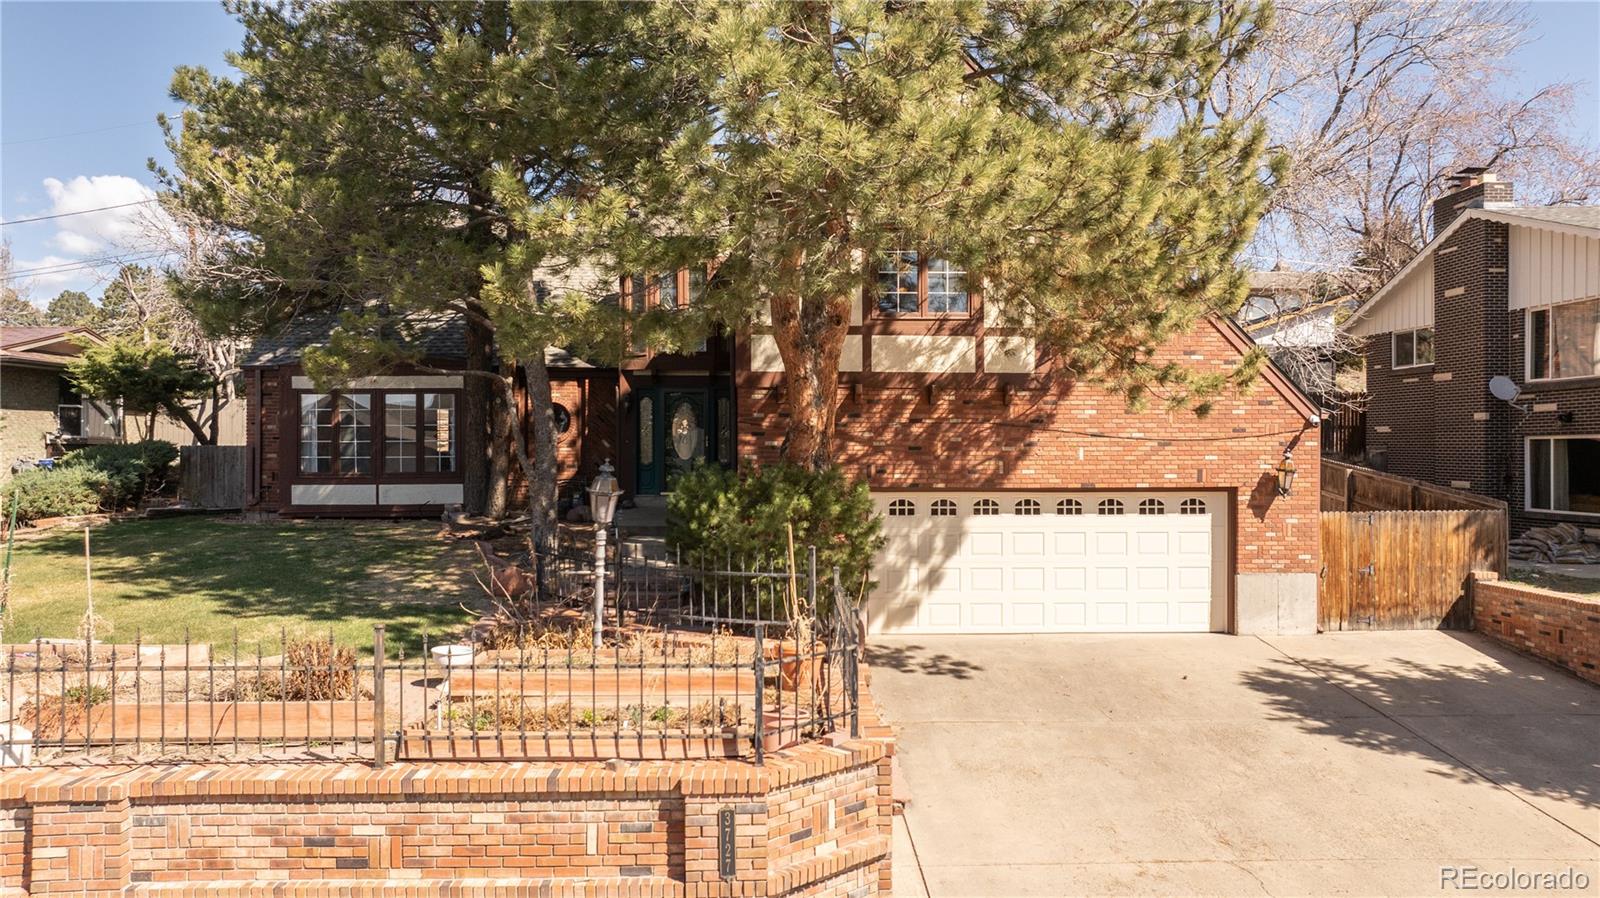 Report Image for 3727 W 81st Place,Westminster, Colorado